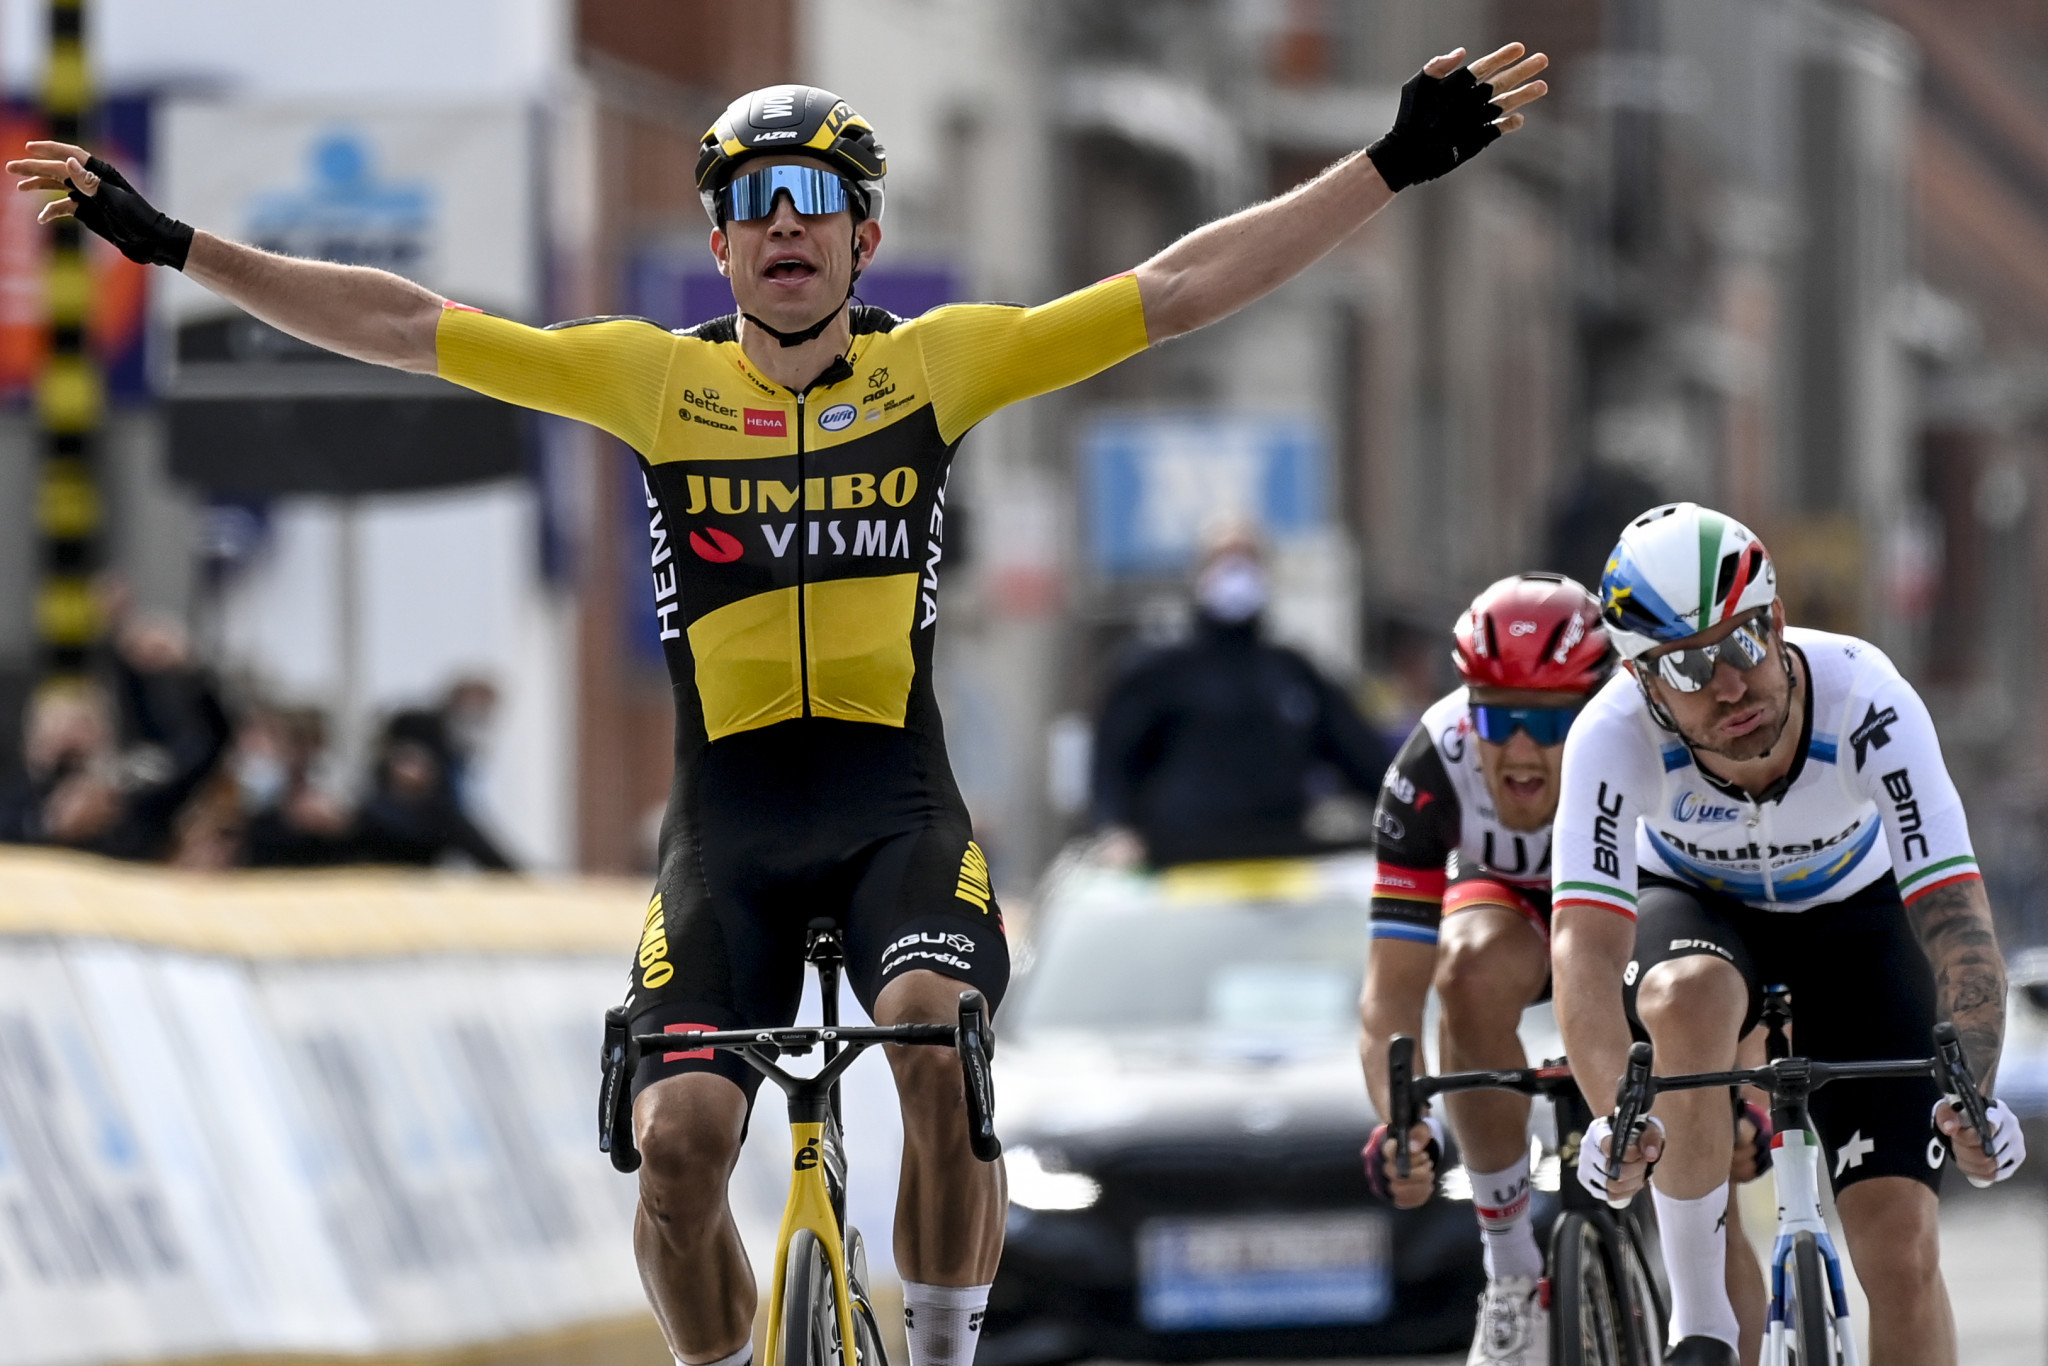 Van Aert wins Gent-Wevelgem as two teams pull out due to COVID-19 cases